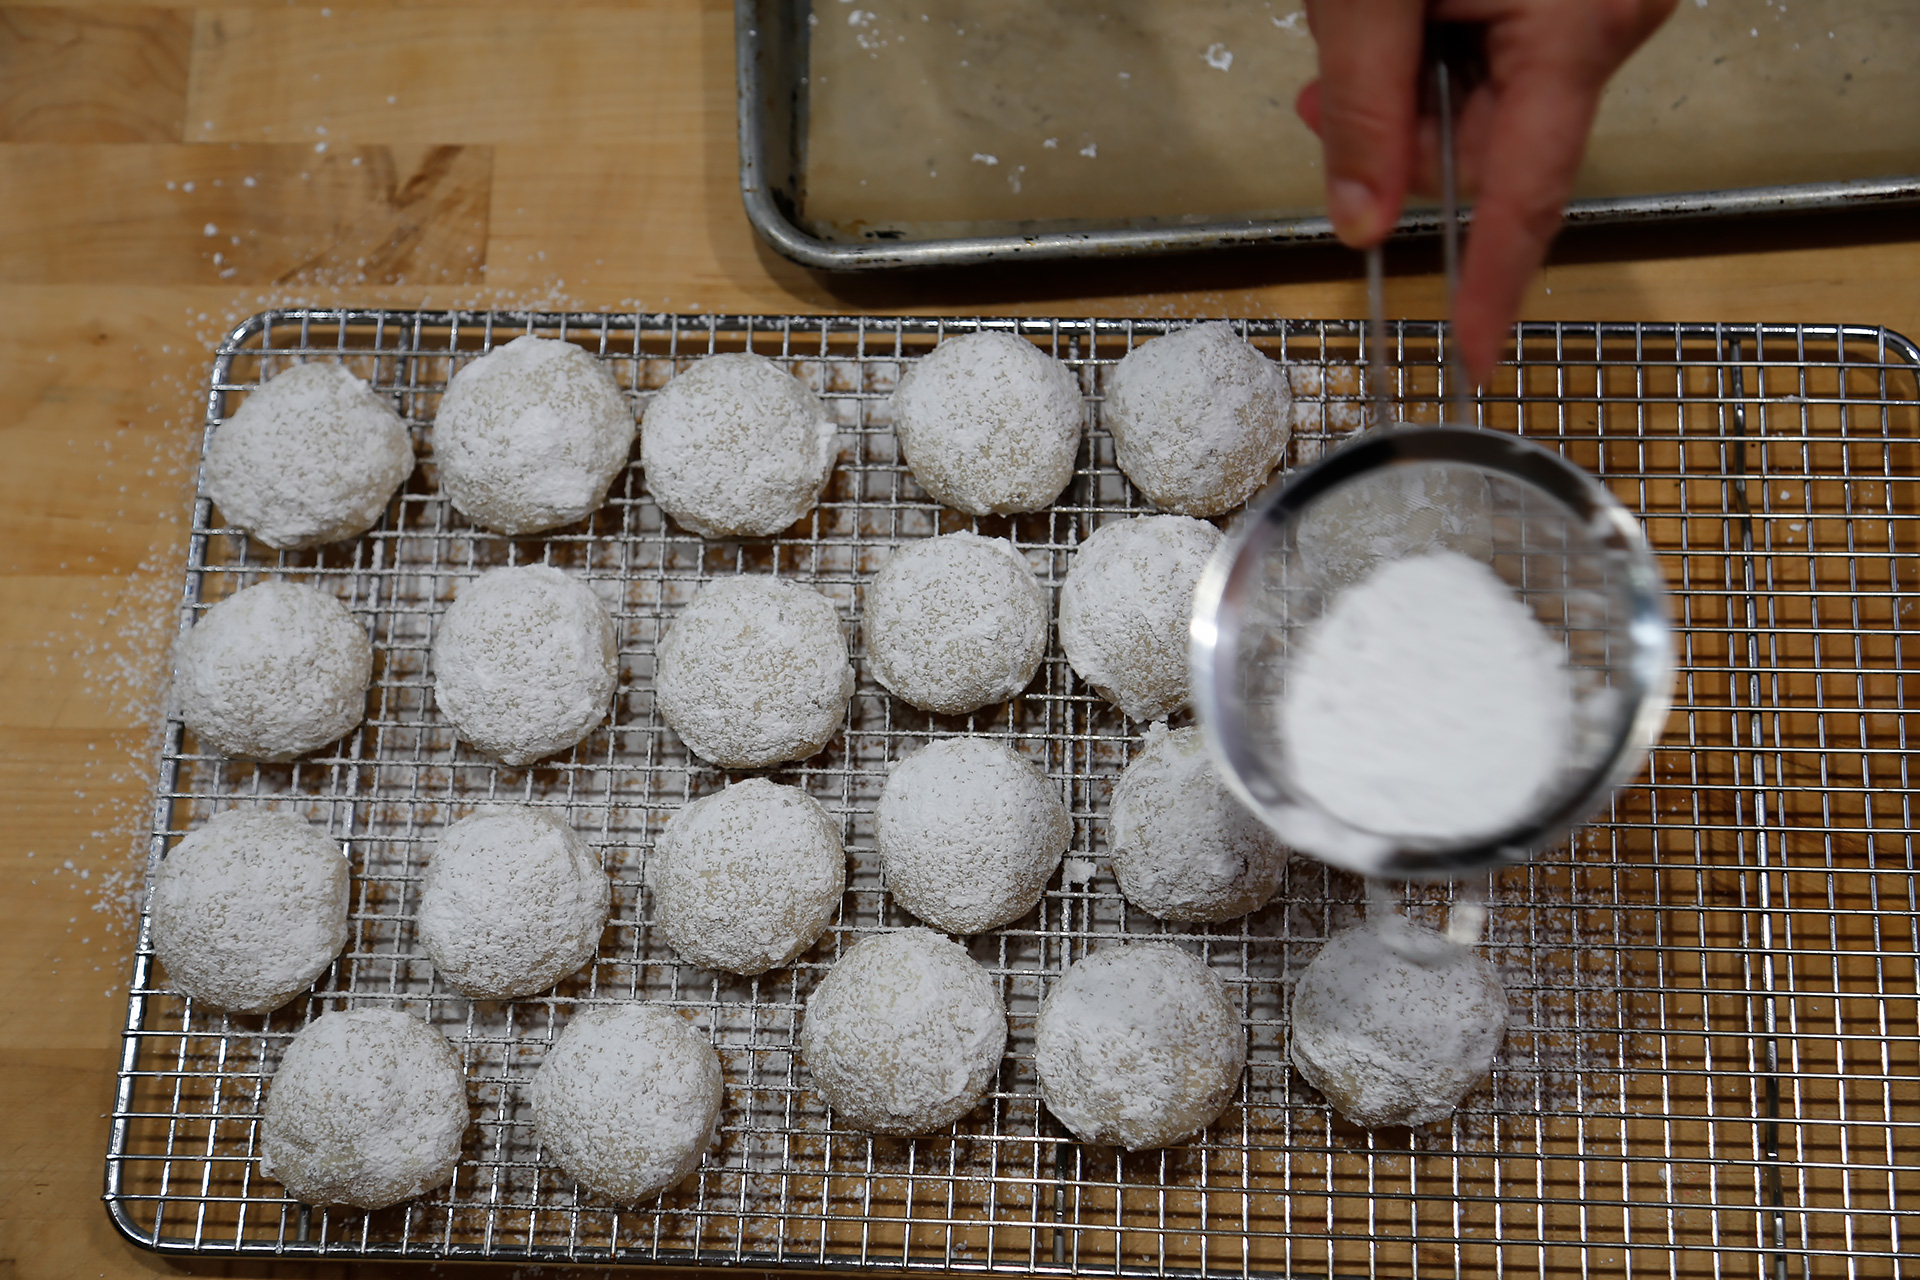 Transfer cookies to a wire rack to cool completely. If you like, dust the cookies with additional powdered sugar.